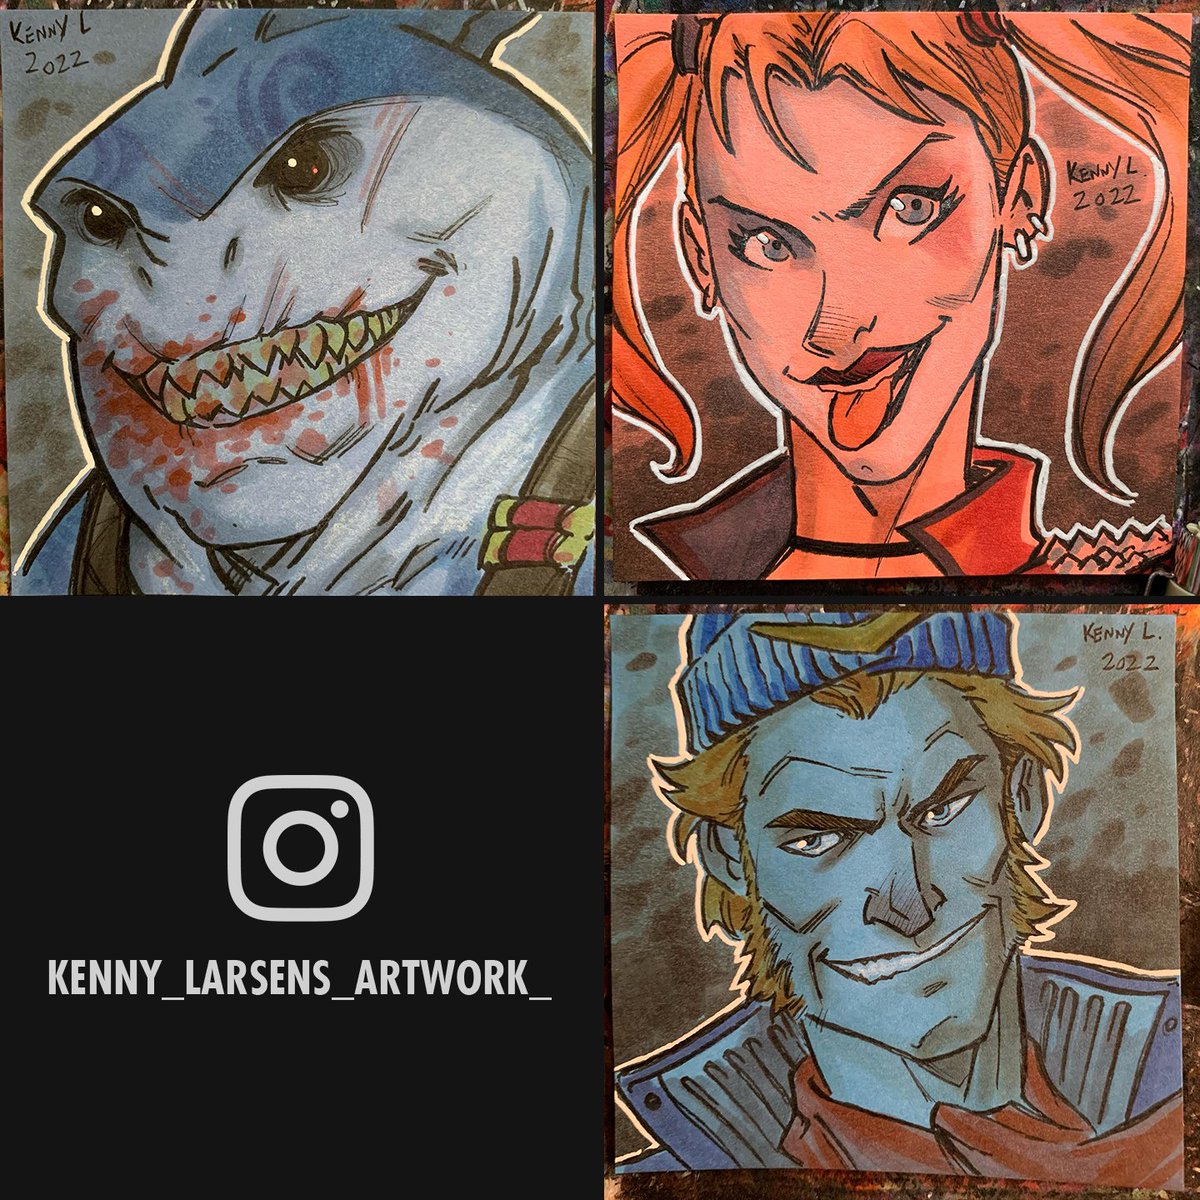 Superb art from kenny_larsens_artwork_ on Instagram. It’s crazy to think that these are drawn on sticky notes! We can’t wait to see Deadshot joining the fray.